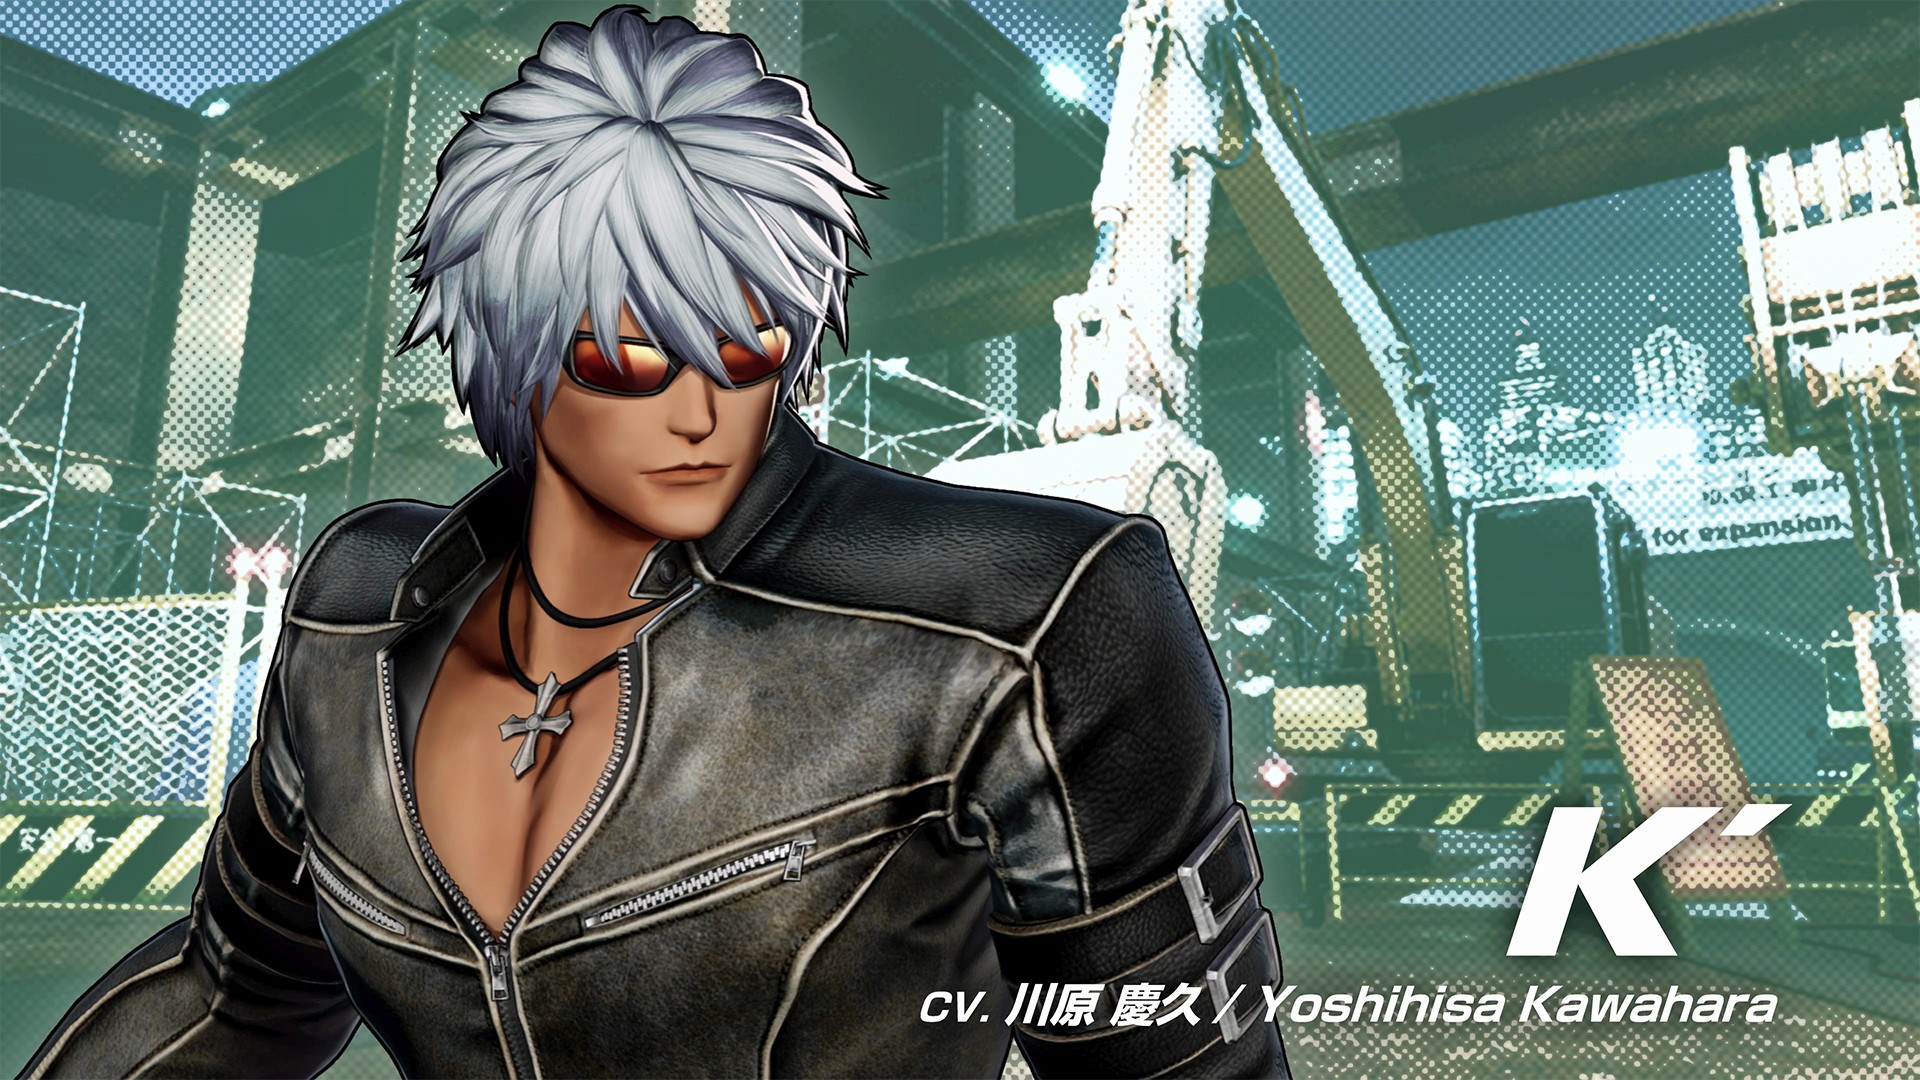 Video For Fan-Favorite K’ Lights up the Stage in The King of Fighters XV